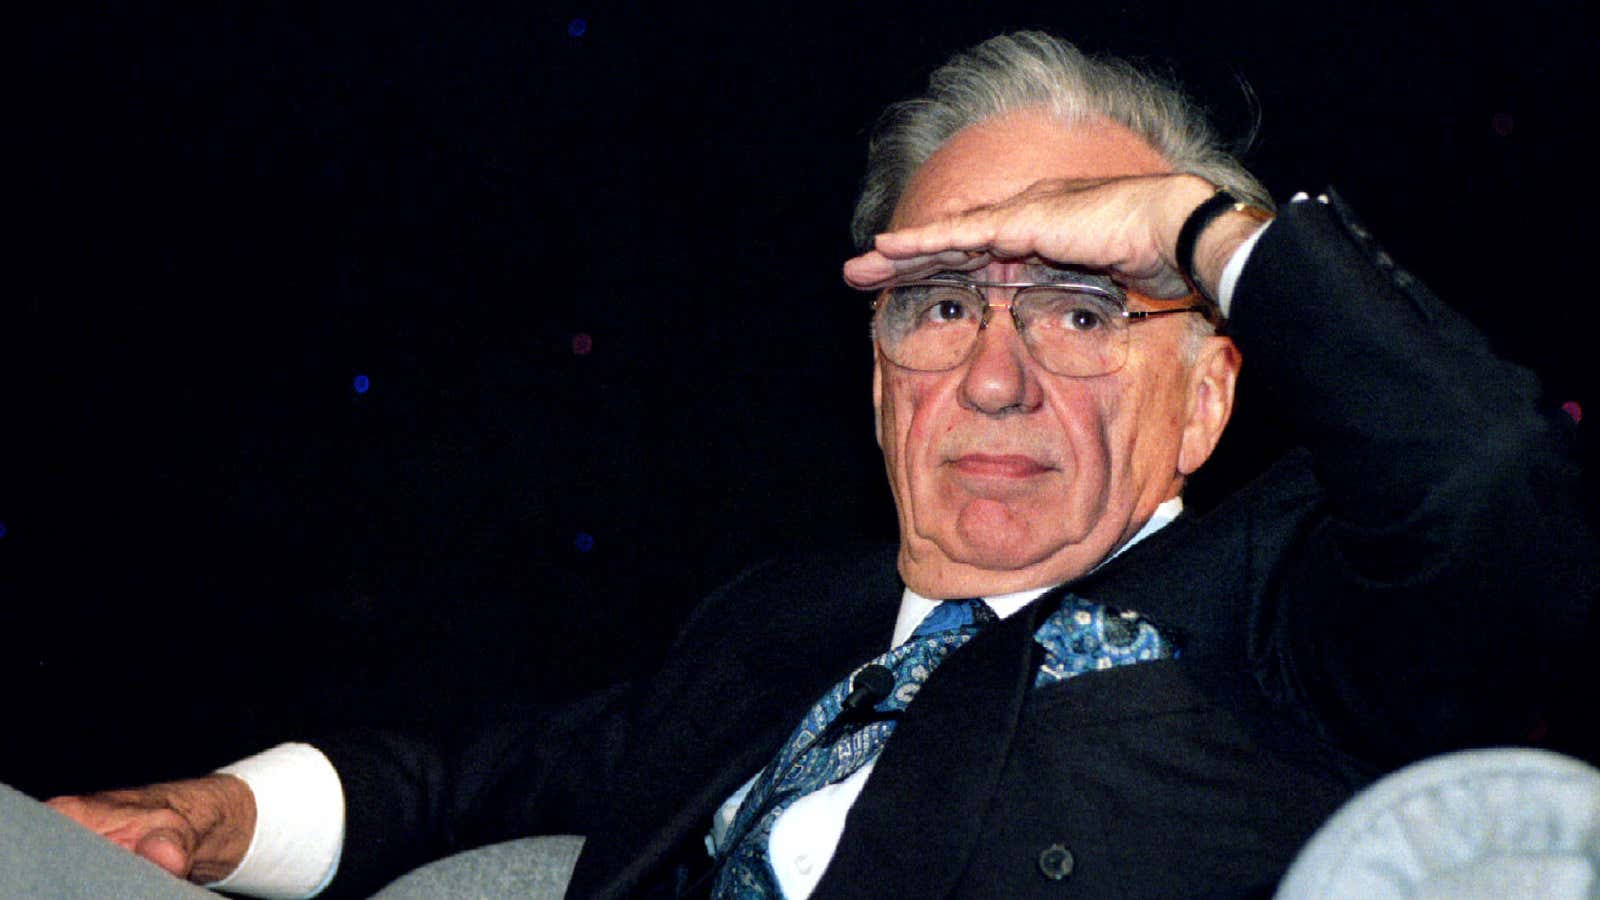 Foreign ownership limits didn’t thwart Rupert Murdoch’s vision for a US media empire. (Murdoch is seen here in empire-building mode in 1995.)